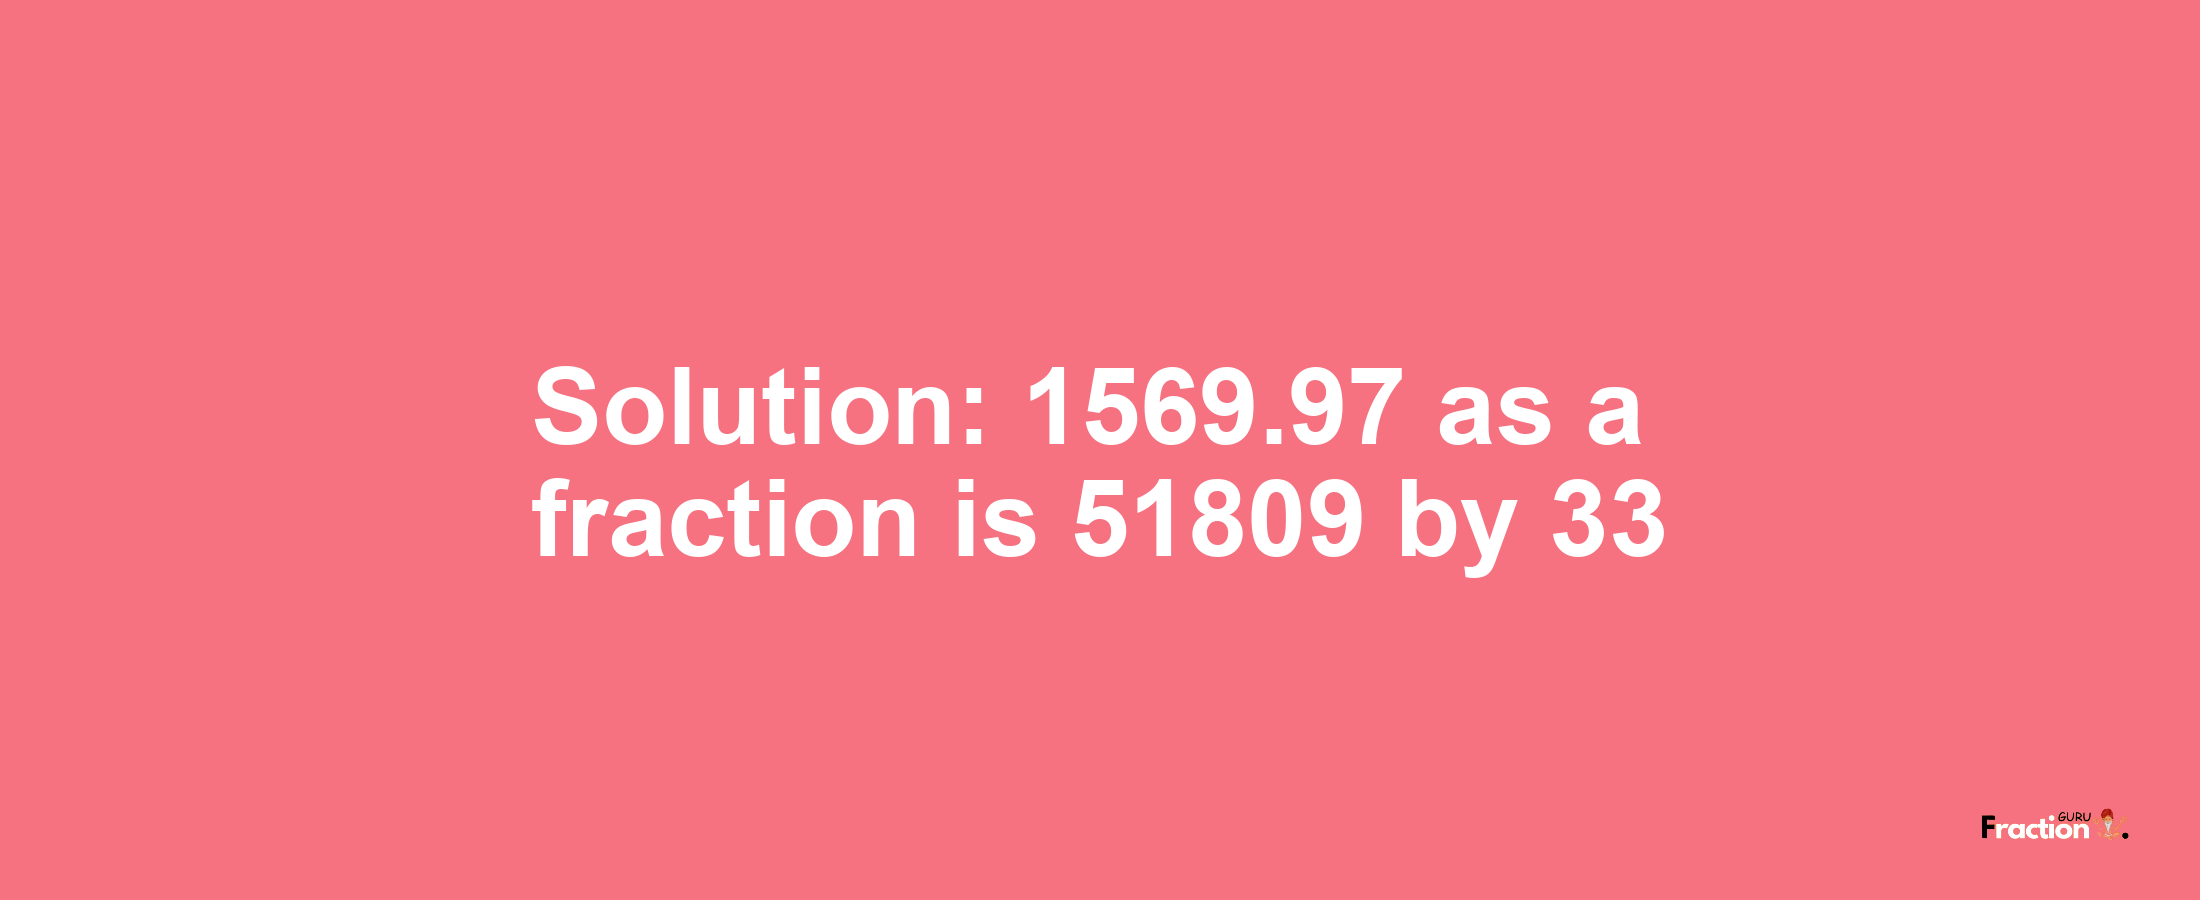 Solution:1569.97 as a fraction is 51809/33